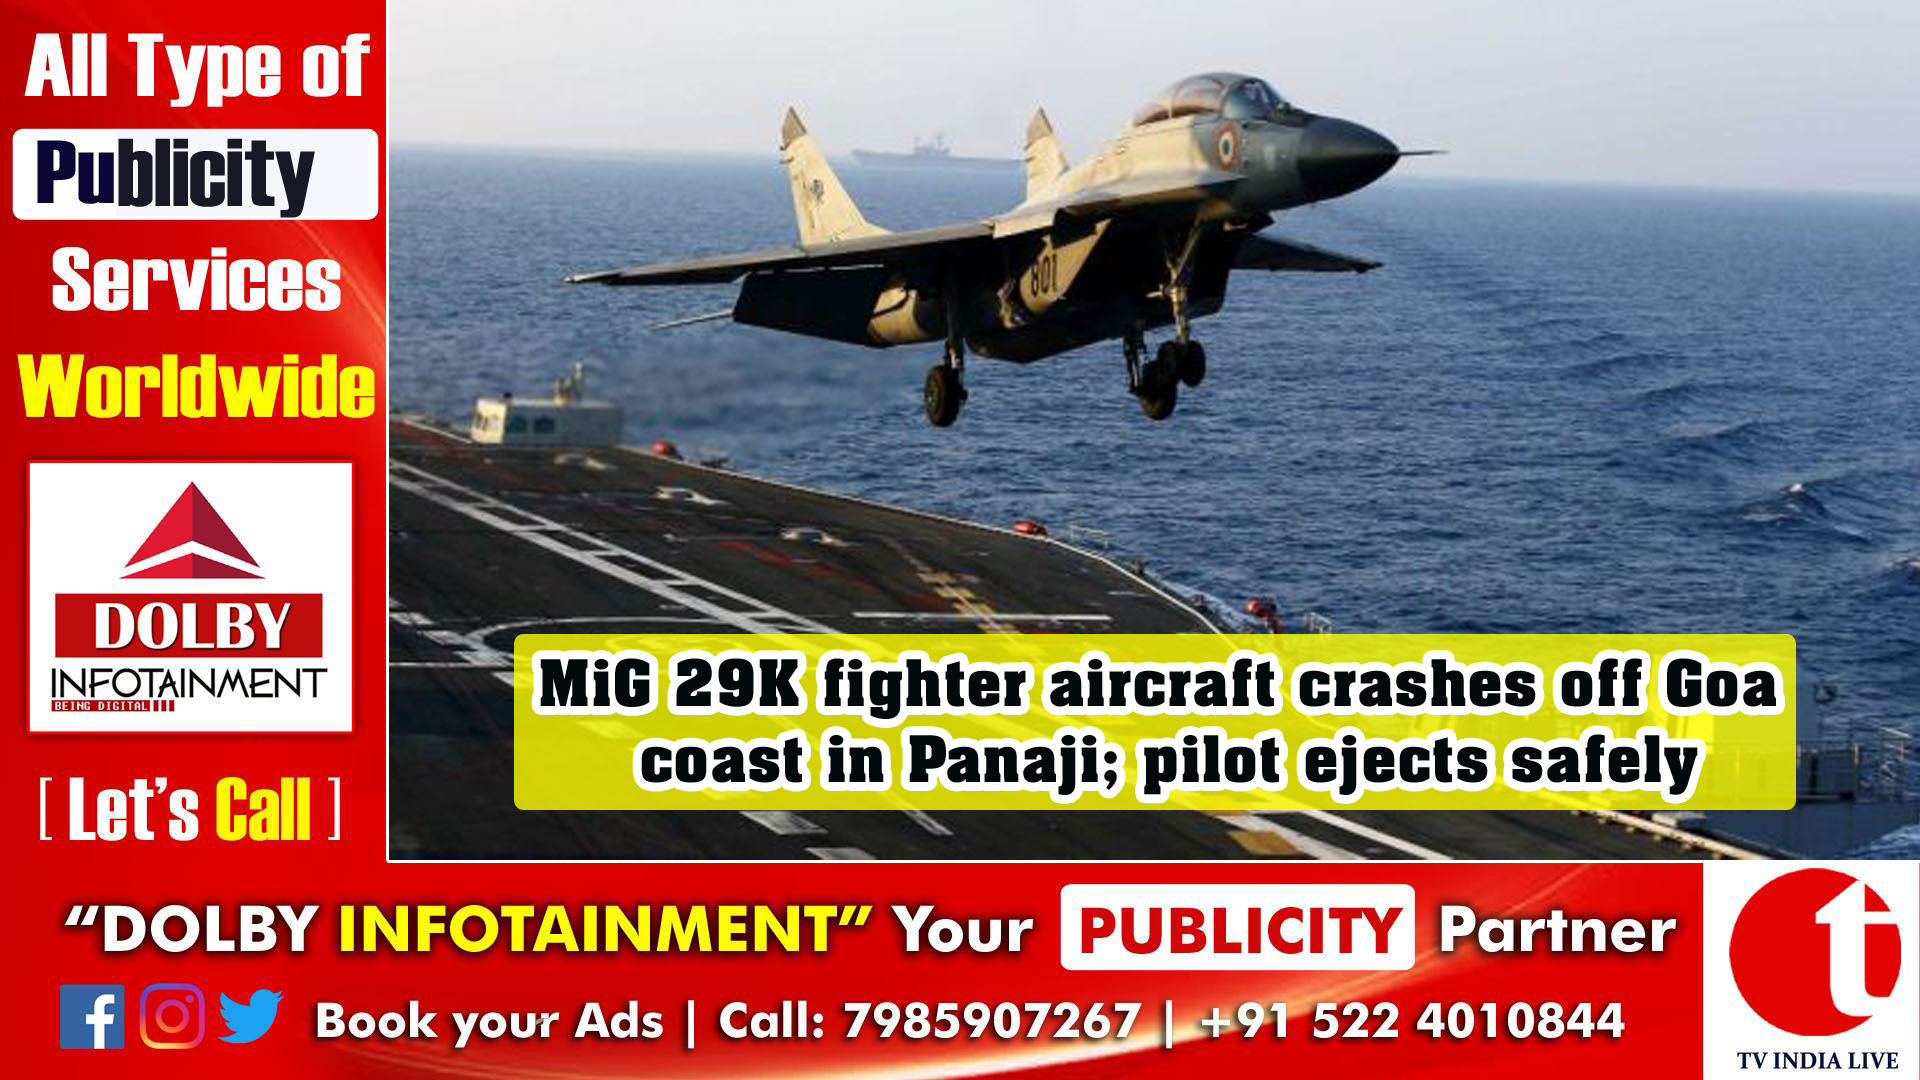 MiG 29K fighter aircraft crashes off Goa coast in Panaji; pilot ejects safely